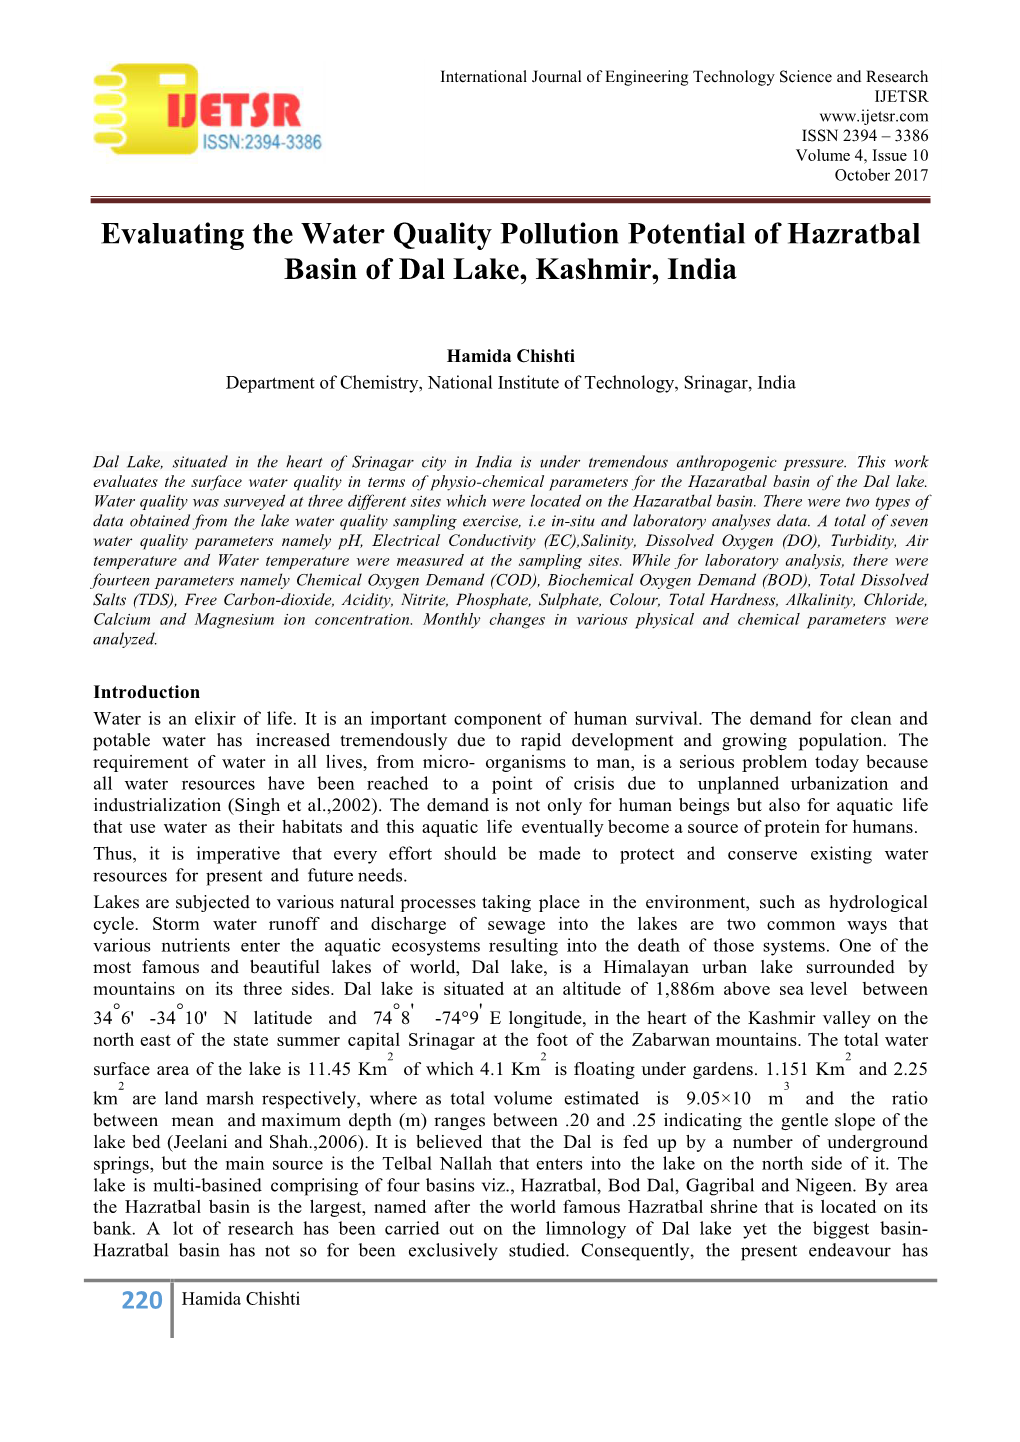 Evaluating the Water Quality Pollution Potential of Hazratbal Basin of Dal Lake, Kashmir, India